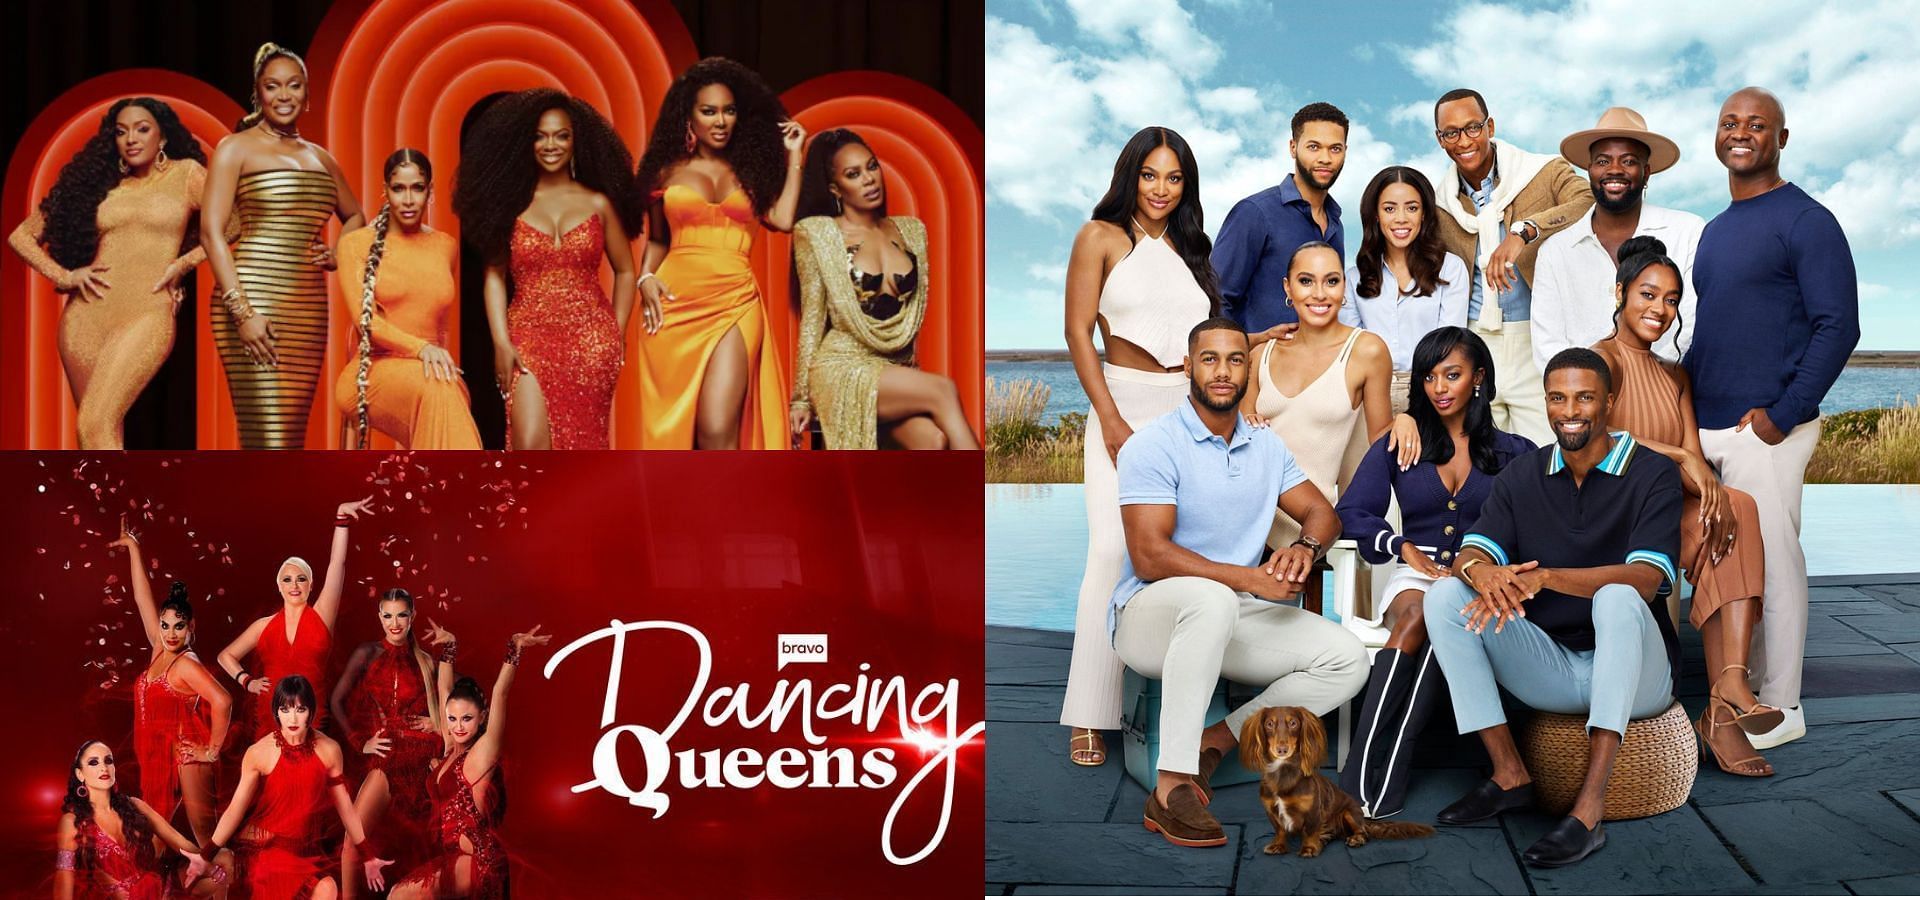 Upcoming May releases on Bravo (Images via BravoTV)